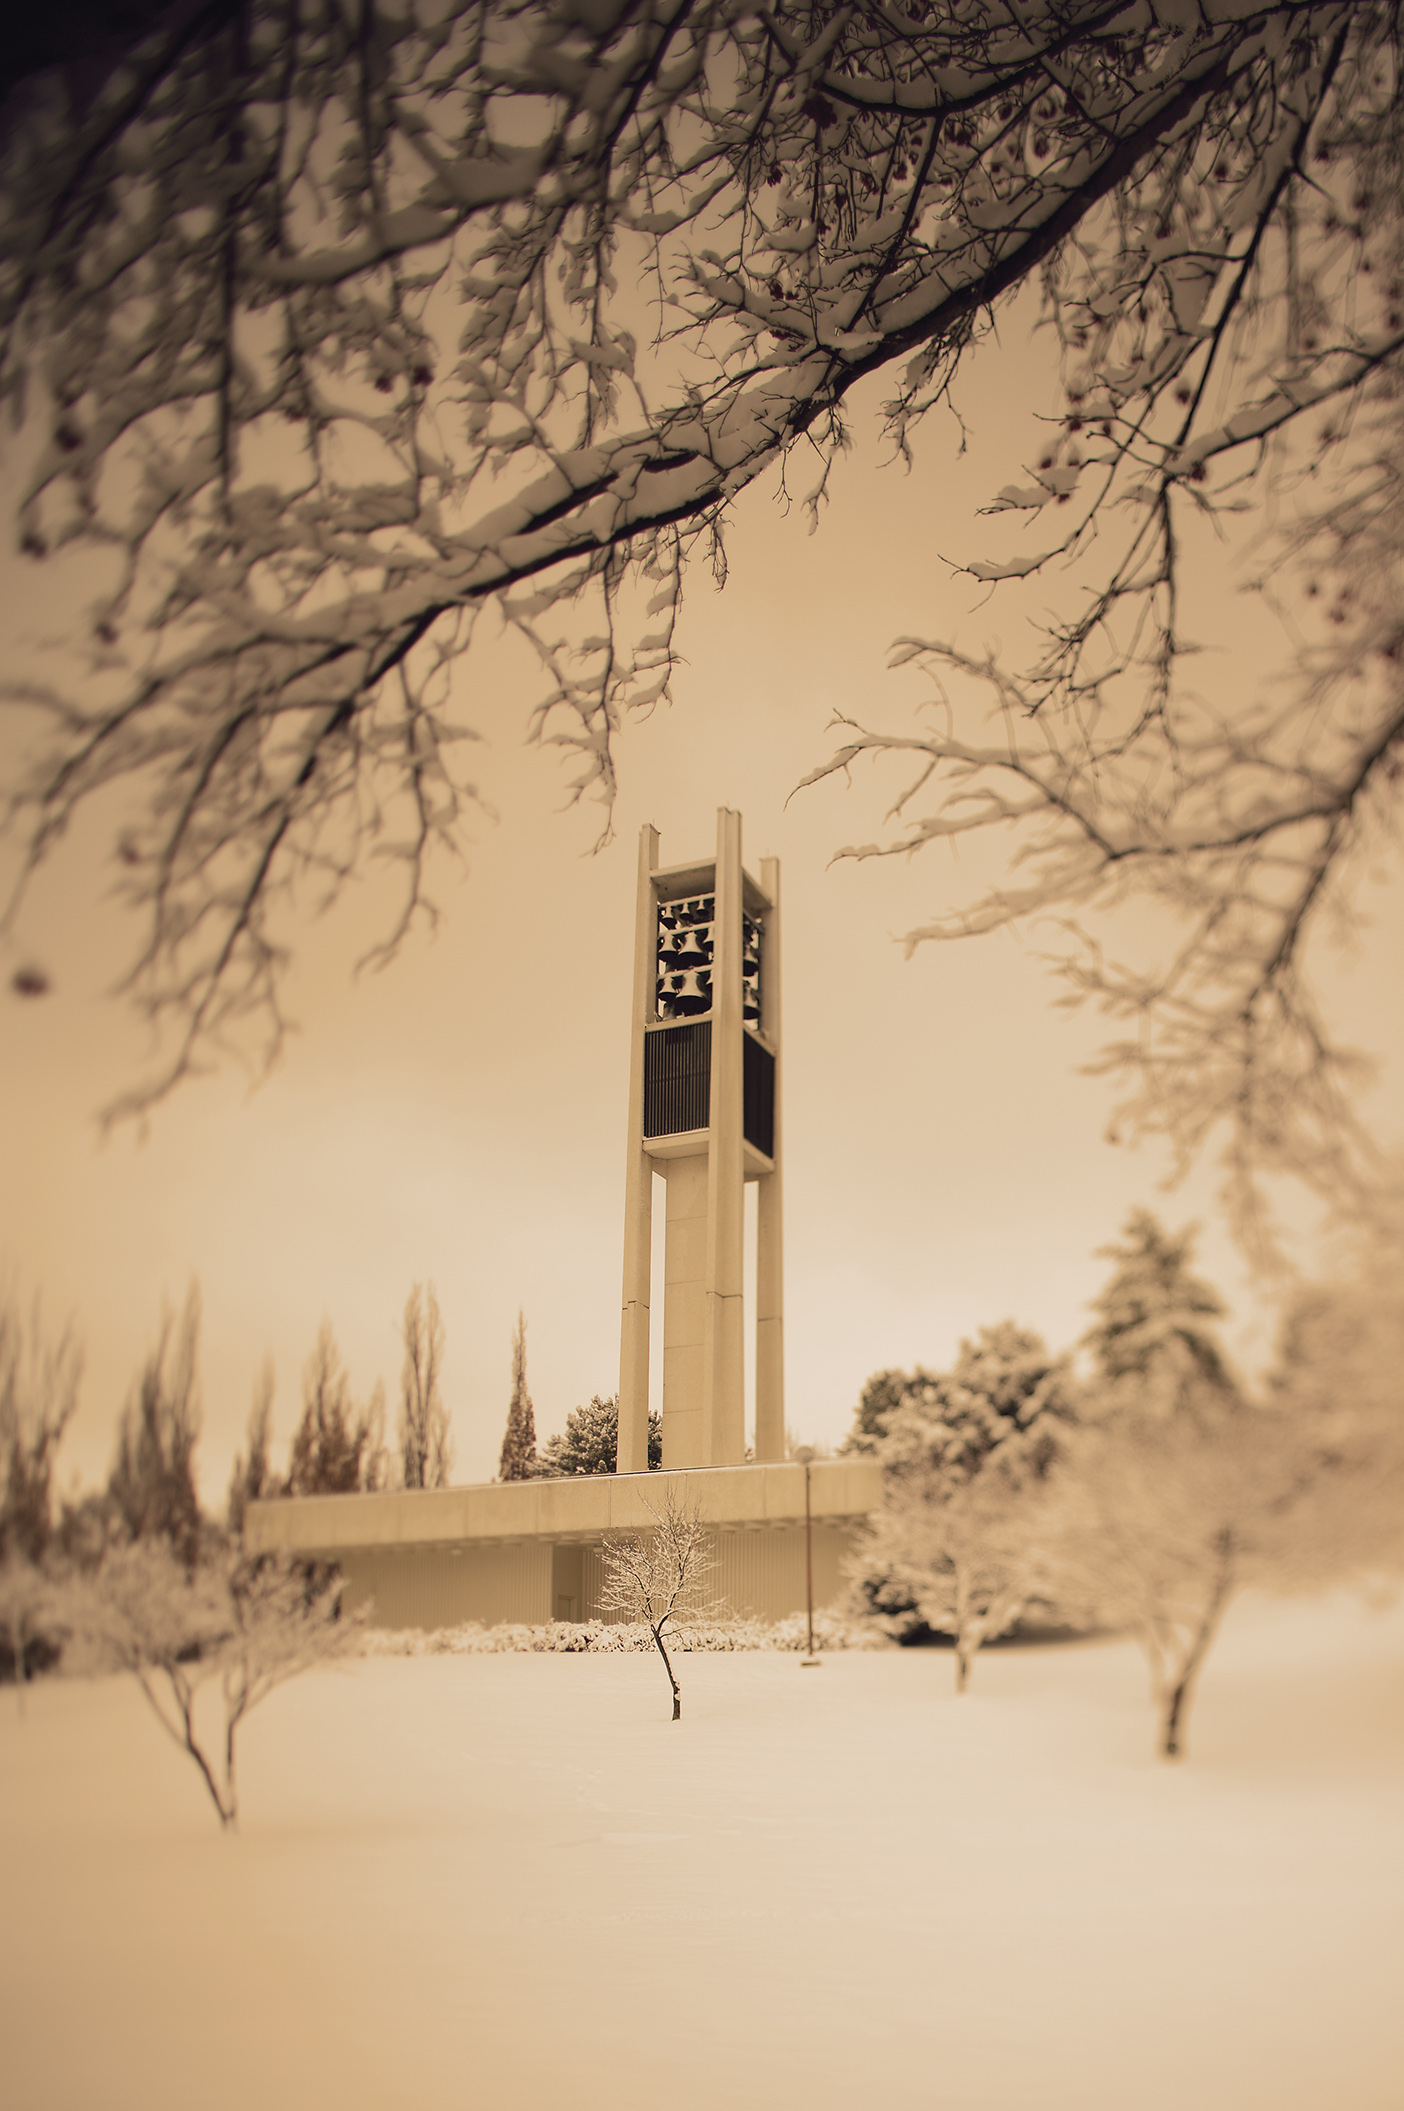 A sepia tone photo of the bell tower in the snow.